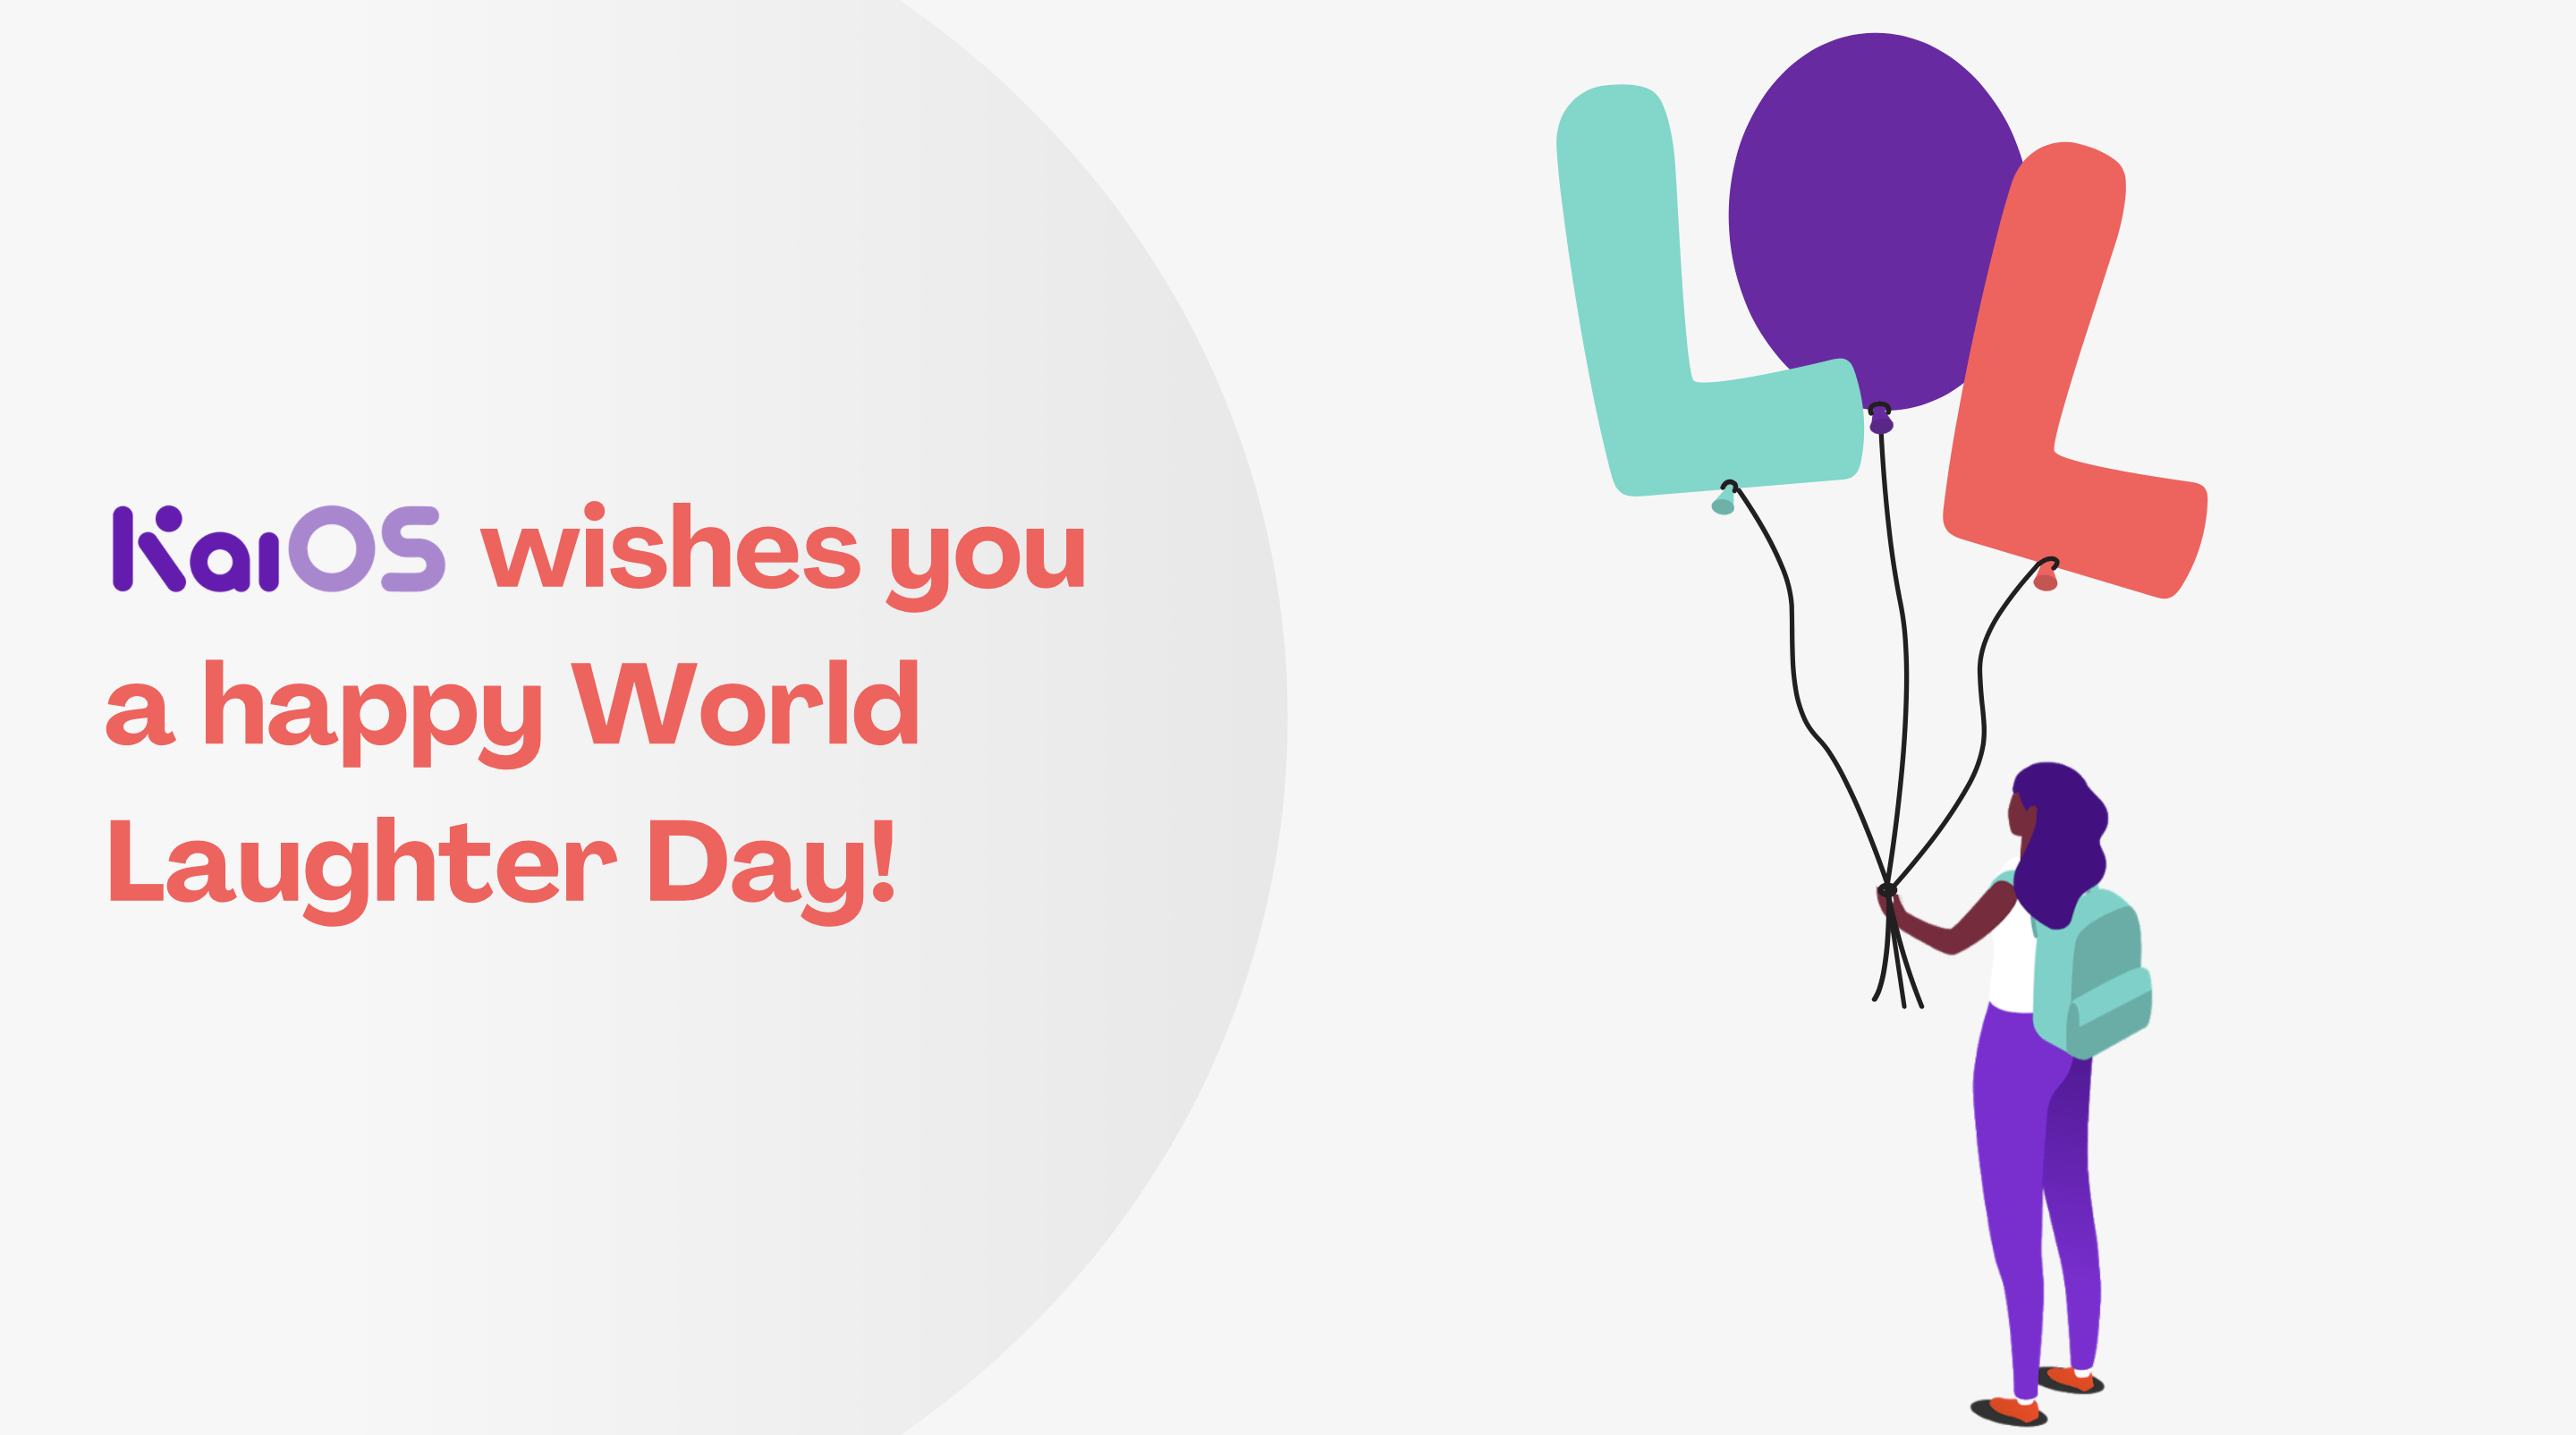 In this First Sunday of May, KaiOS wishes you a happy World Laughter Day!